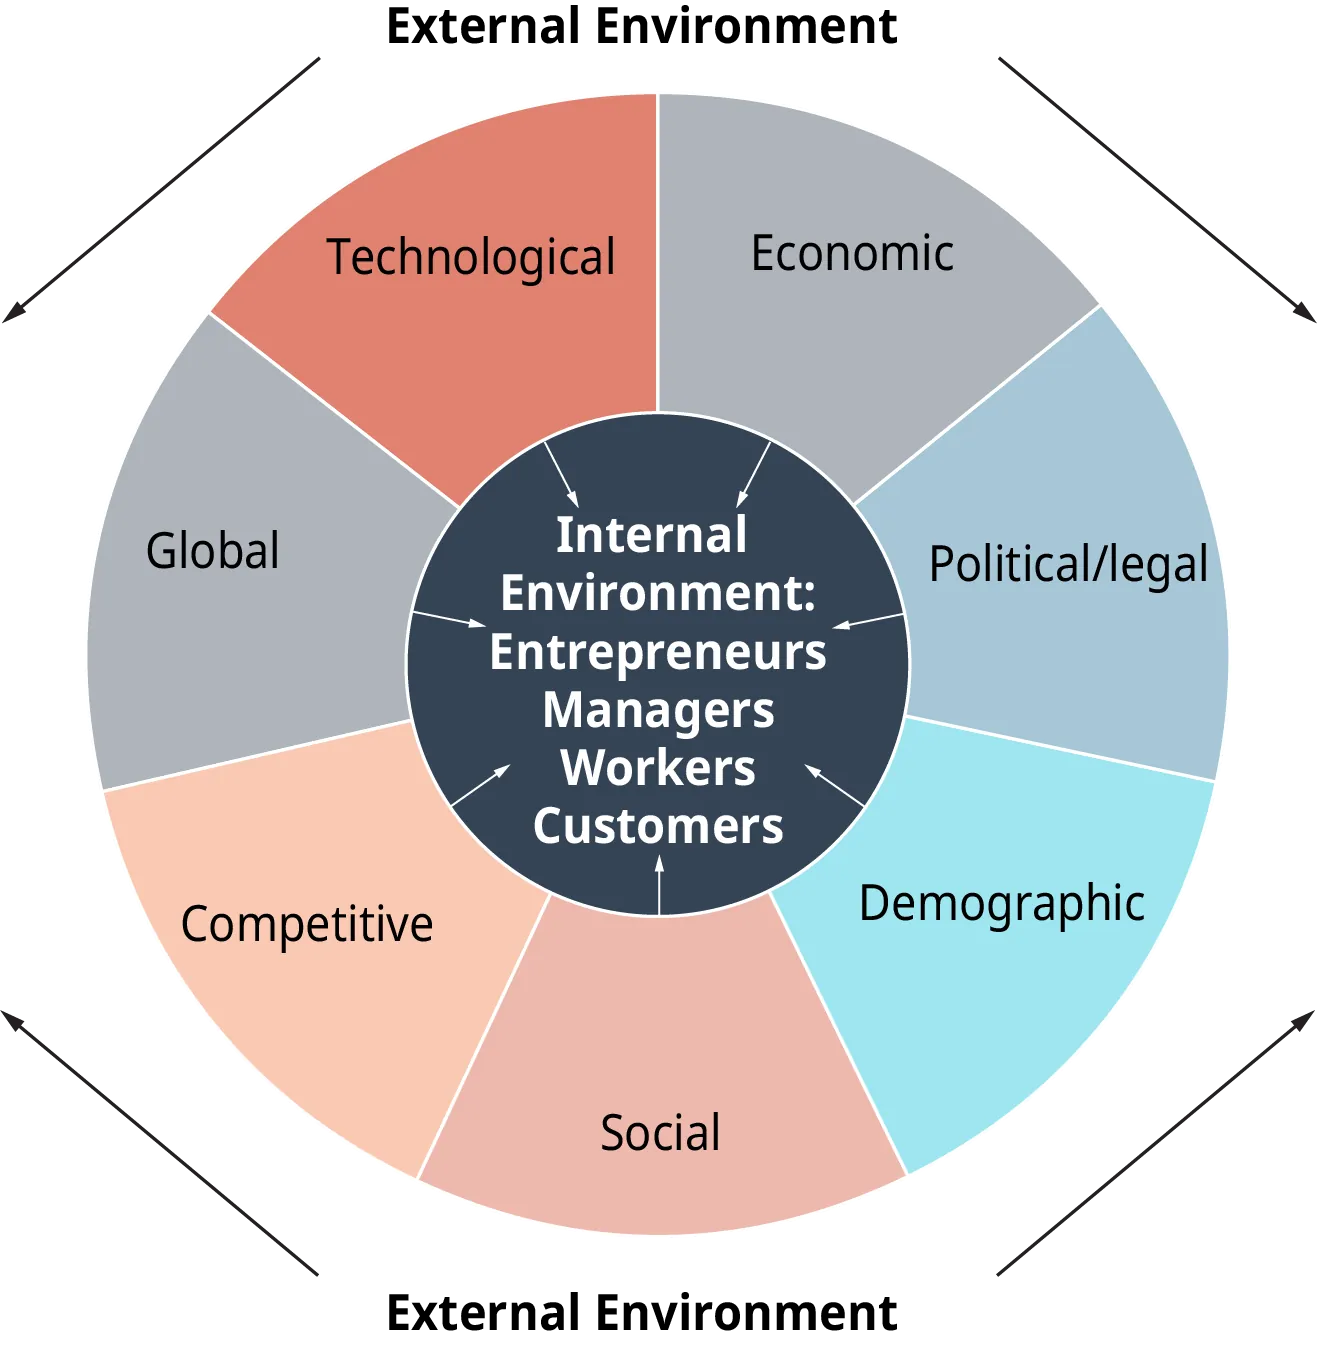 The diagram is a circle, with a core that is labeled, and sections surrounding the core that are labeled. Outside of the circle is the external environment, which affects the contents of the circle. The core is labeled as, Internal Environment; entrepreneurs, managers, workers, and customers. The sections surrounding the core are as follows; technological, and economic, and political slash legal, and demographic, and social, and competitive, and global. All these sections have arrows pointing inward to the core internal environment.